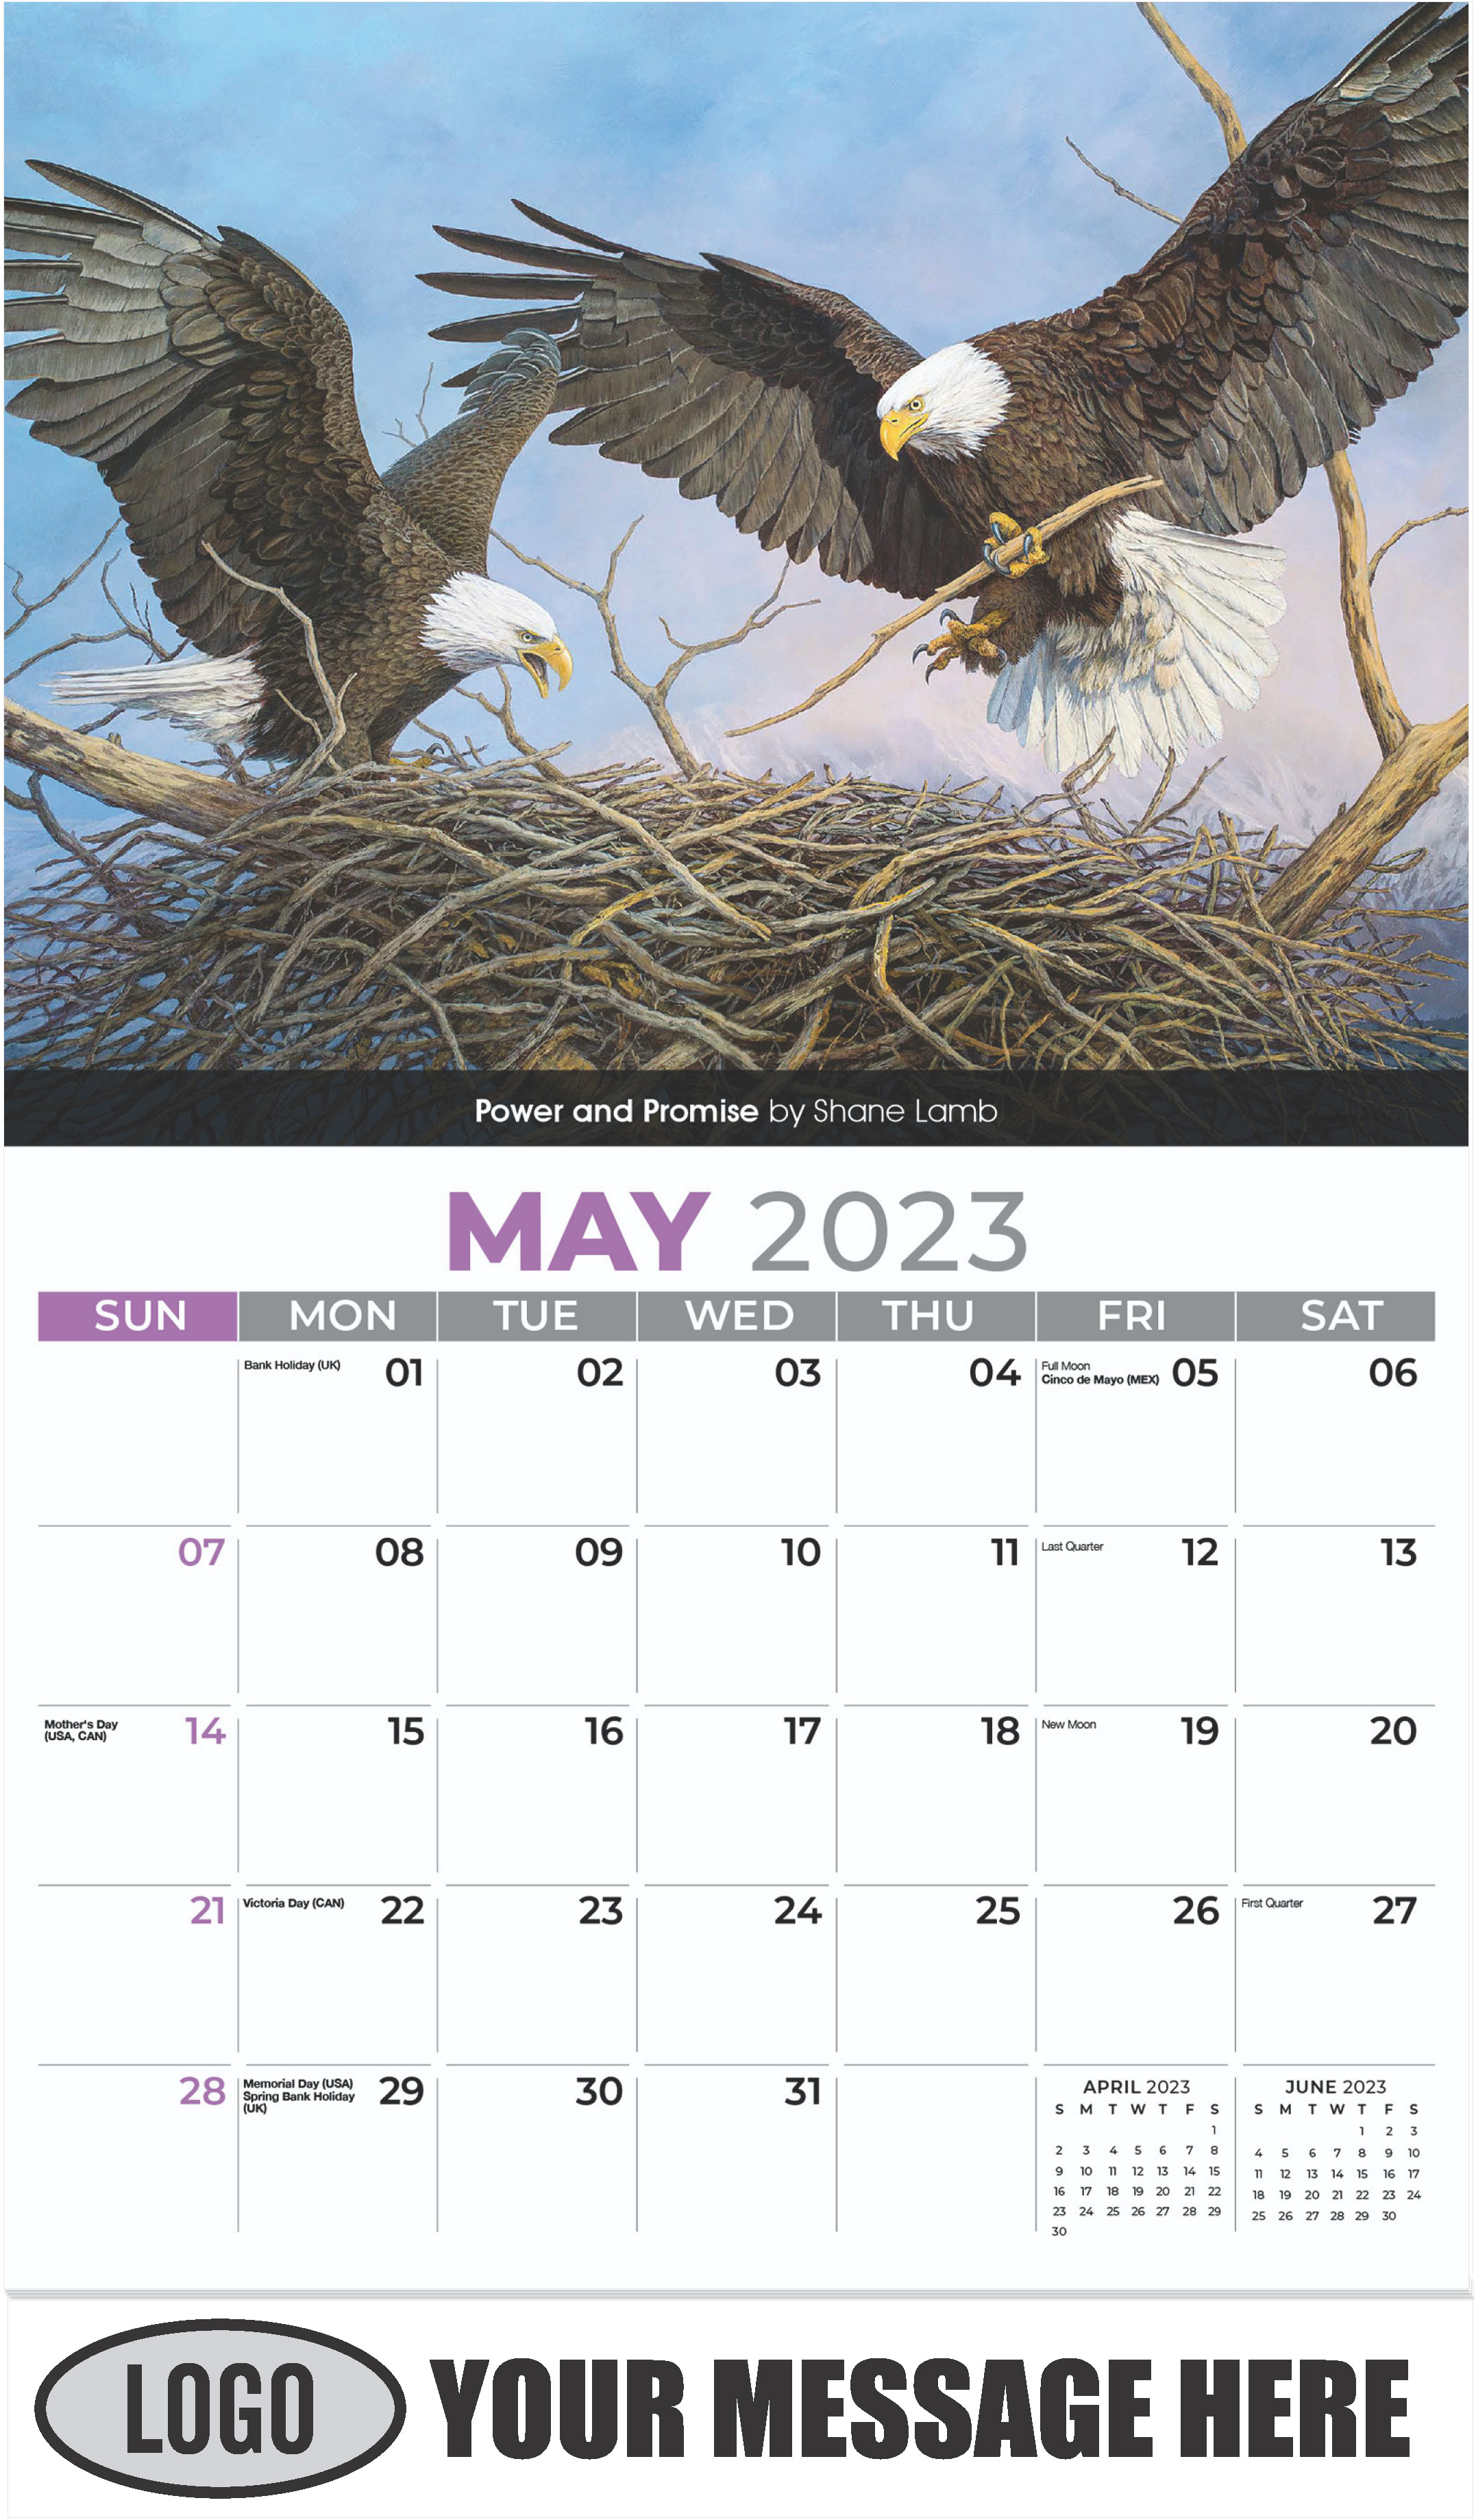 Power and Promise by Shane Lamb - May - Wildlife Portraits 2023 Promotional Calendar